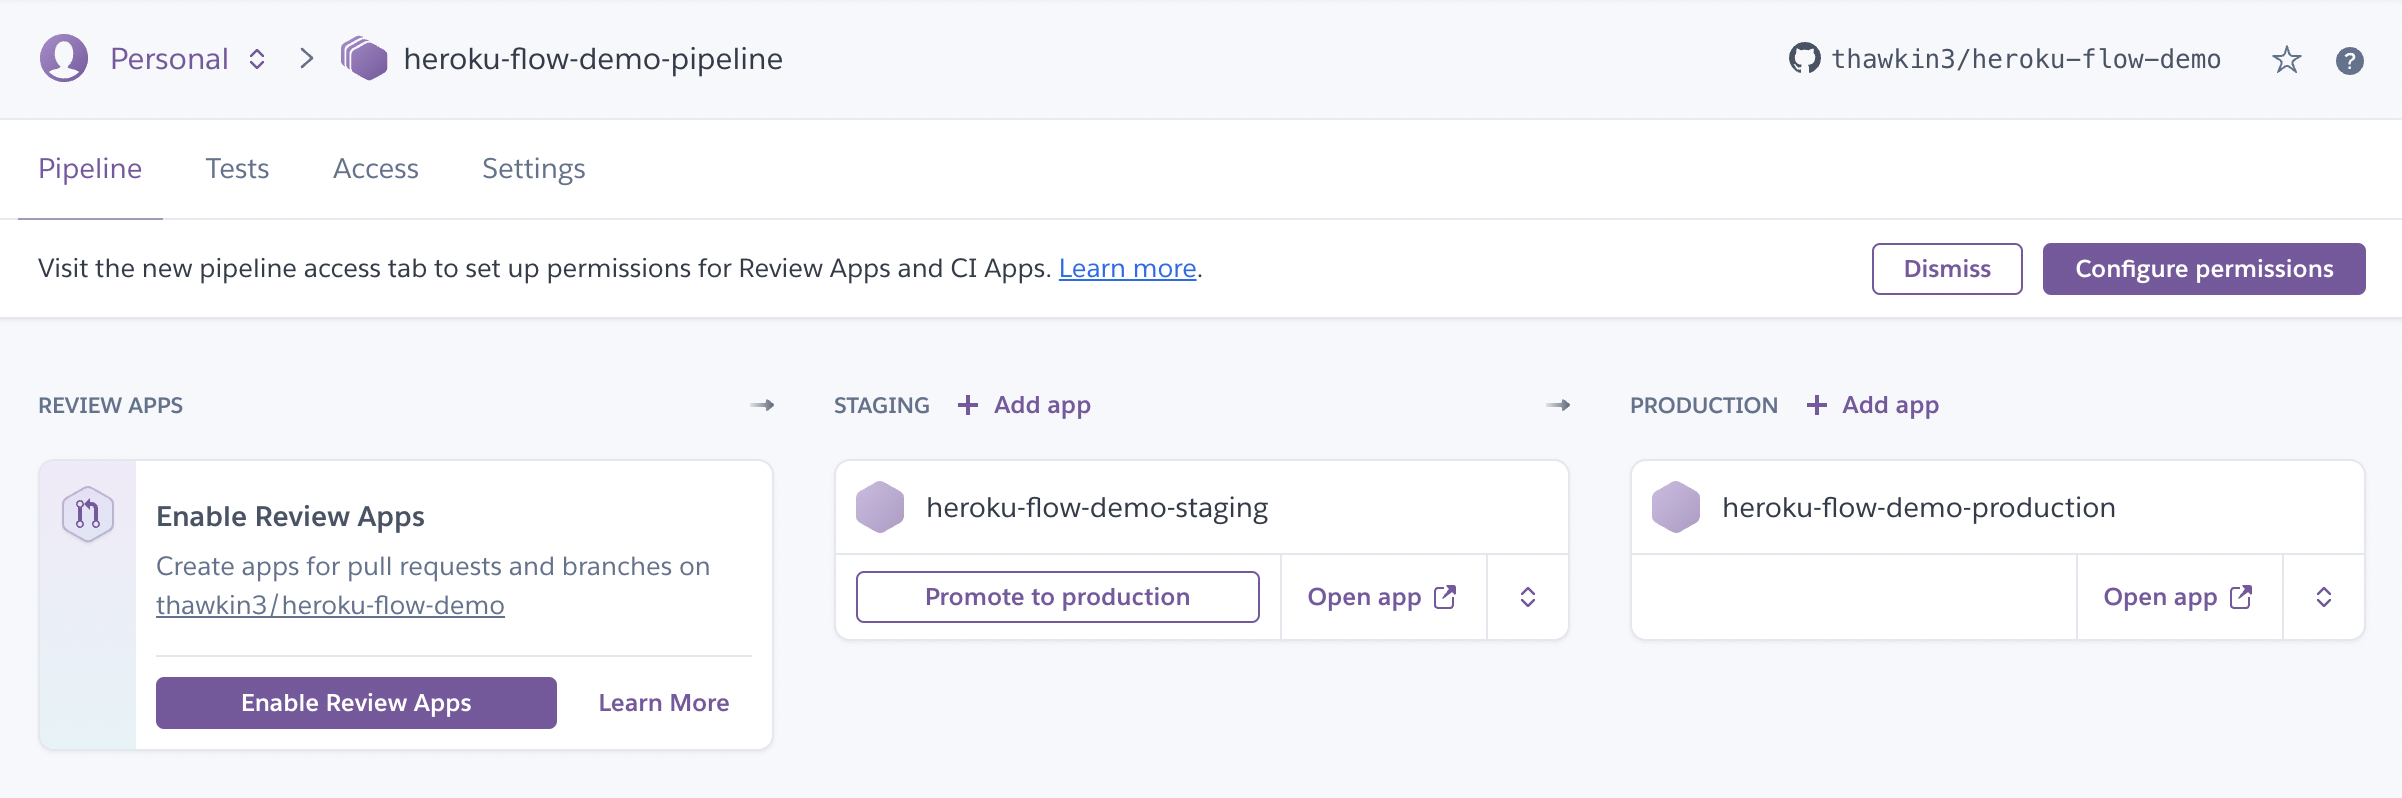 Heroku pipeline with a staging app and a production app